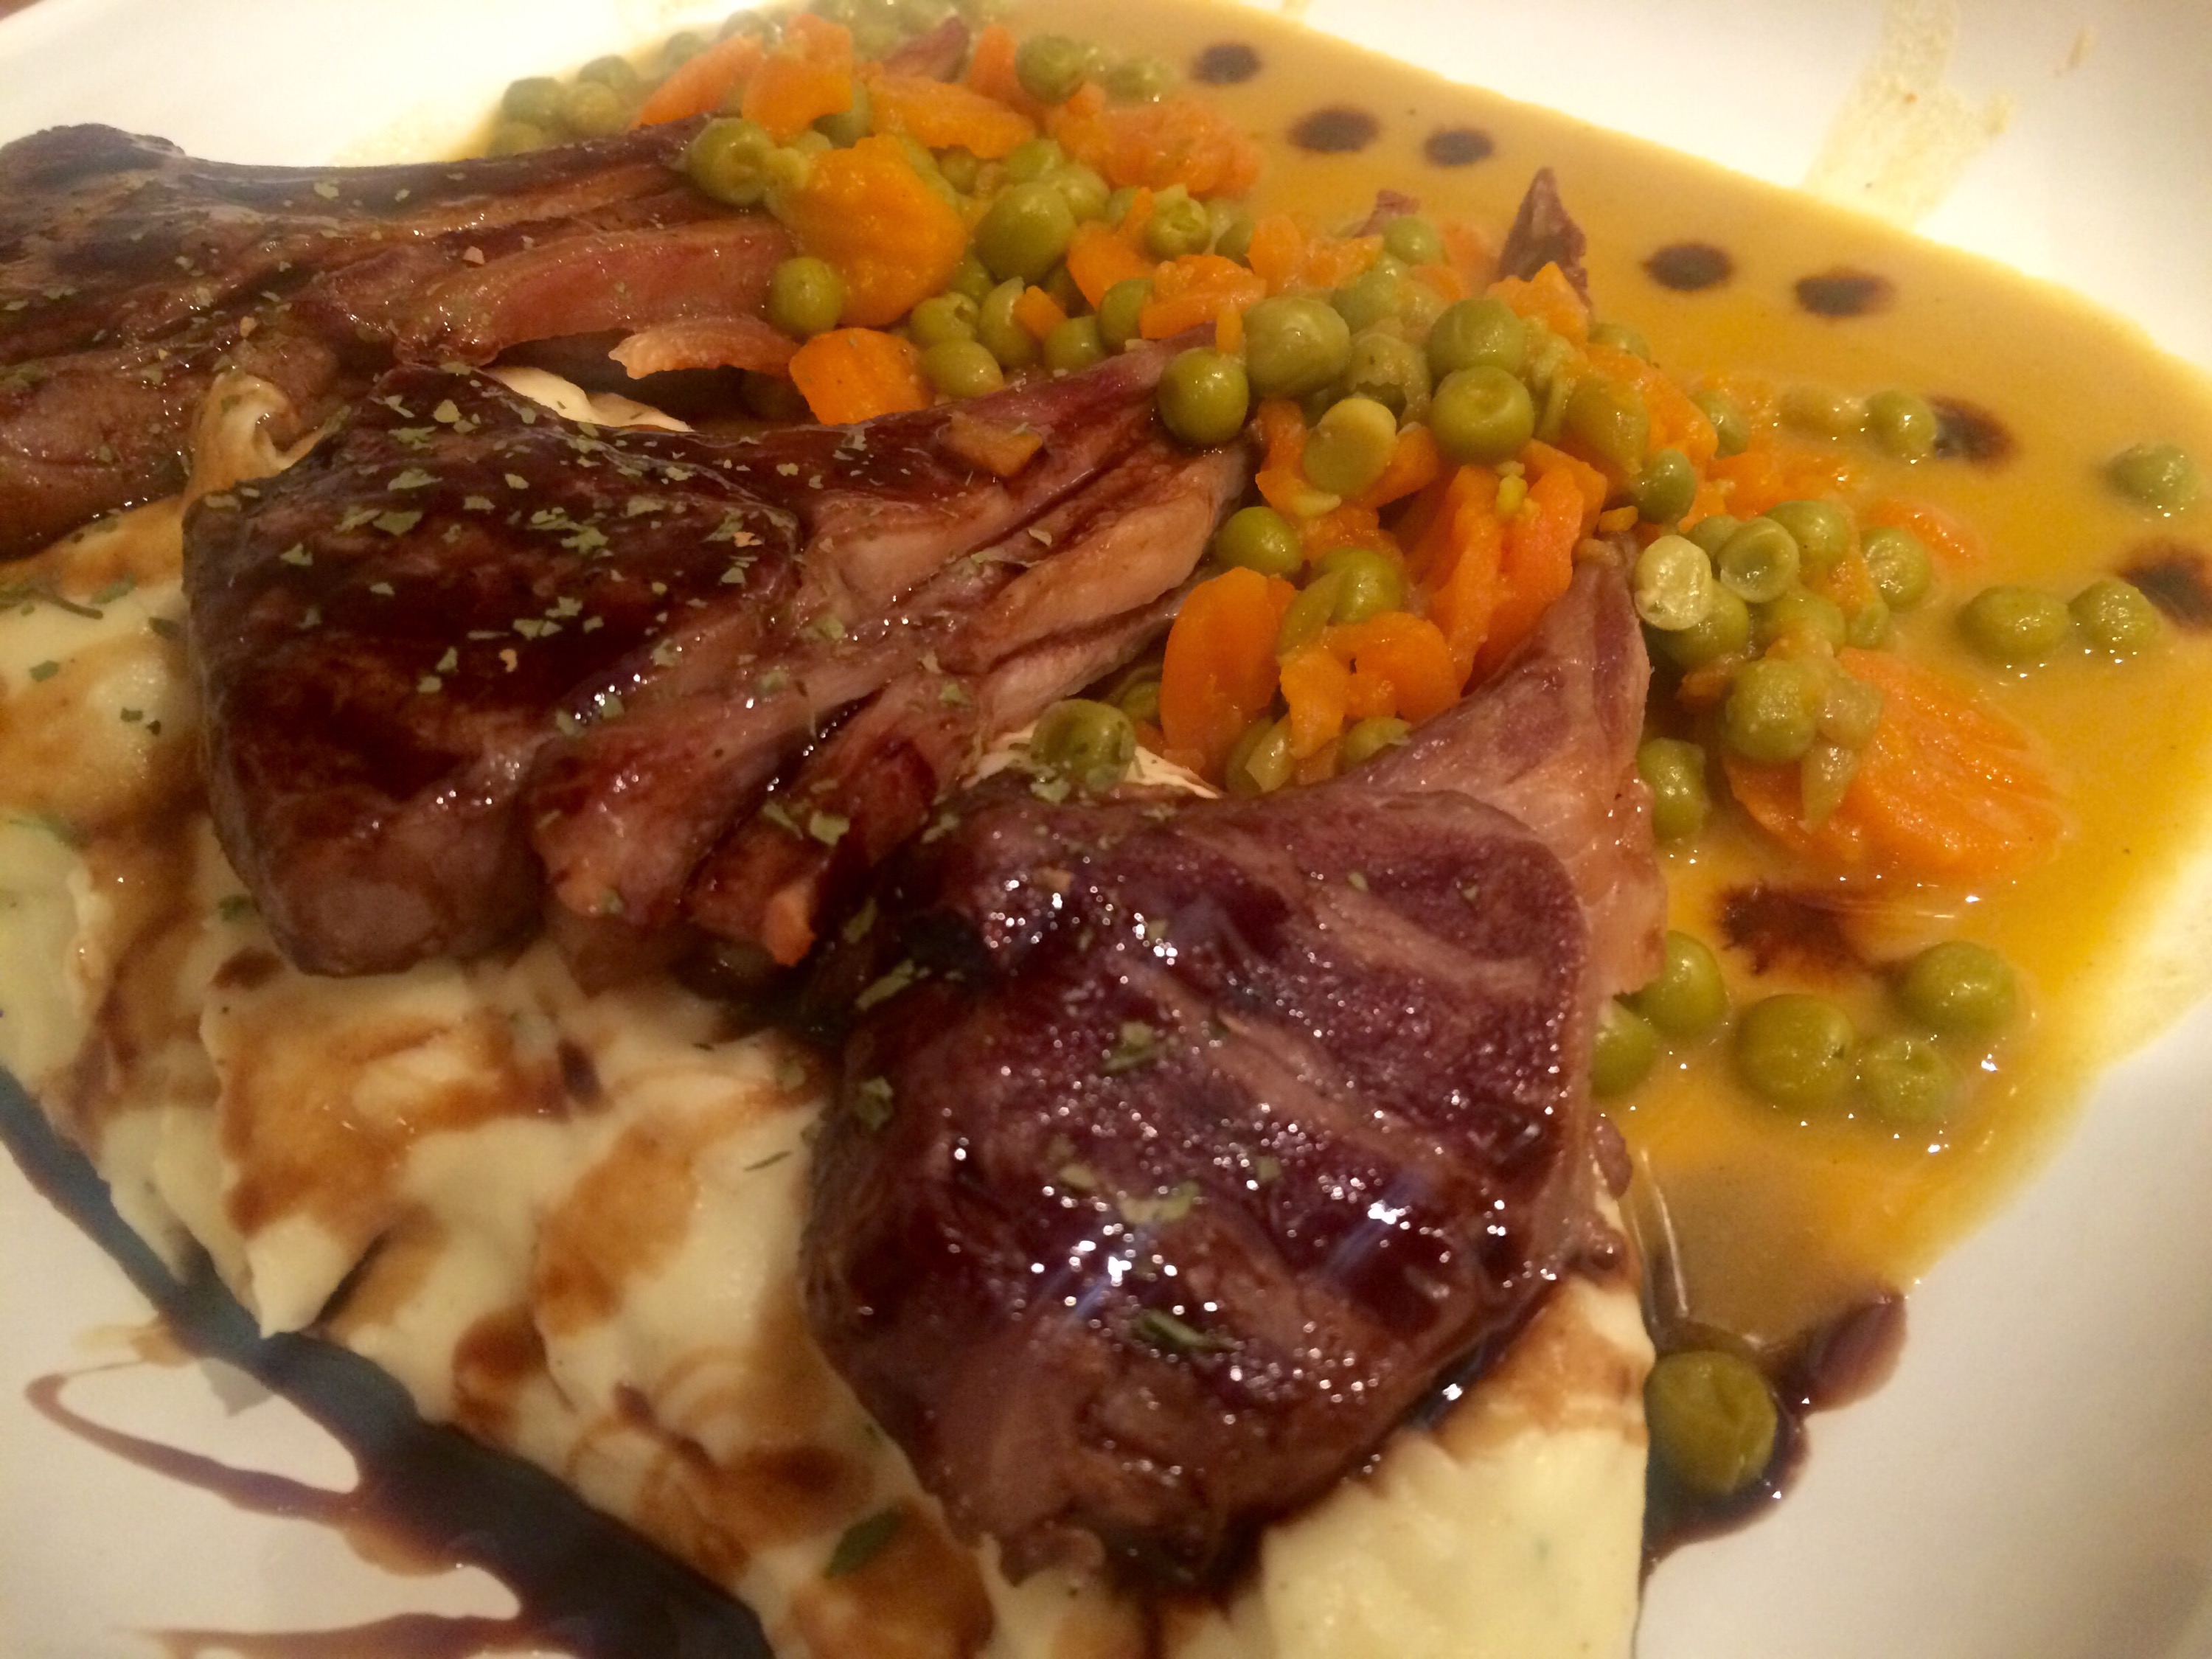 Optigrill frenched lamb chops, whipped cream potatoes, French lamby
peas and carrots 